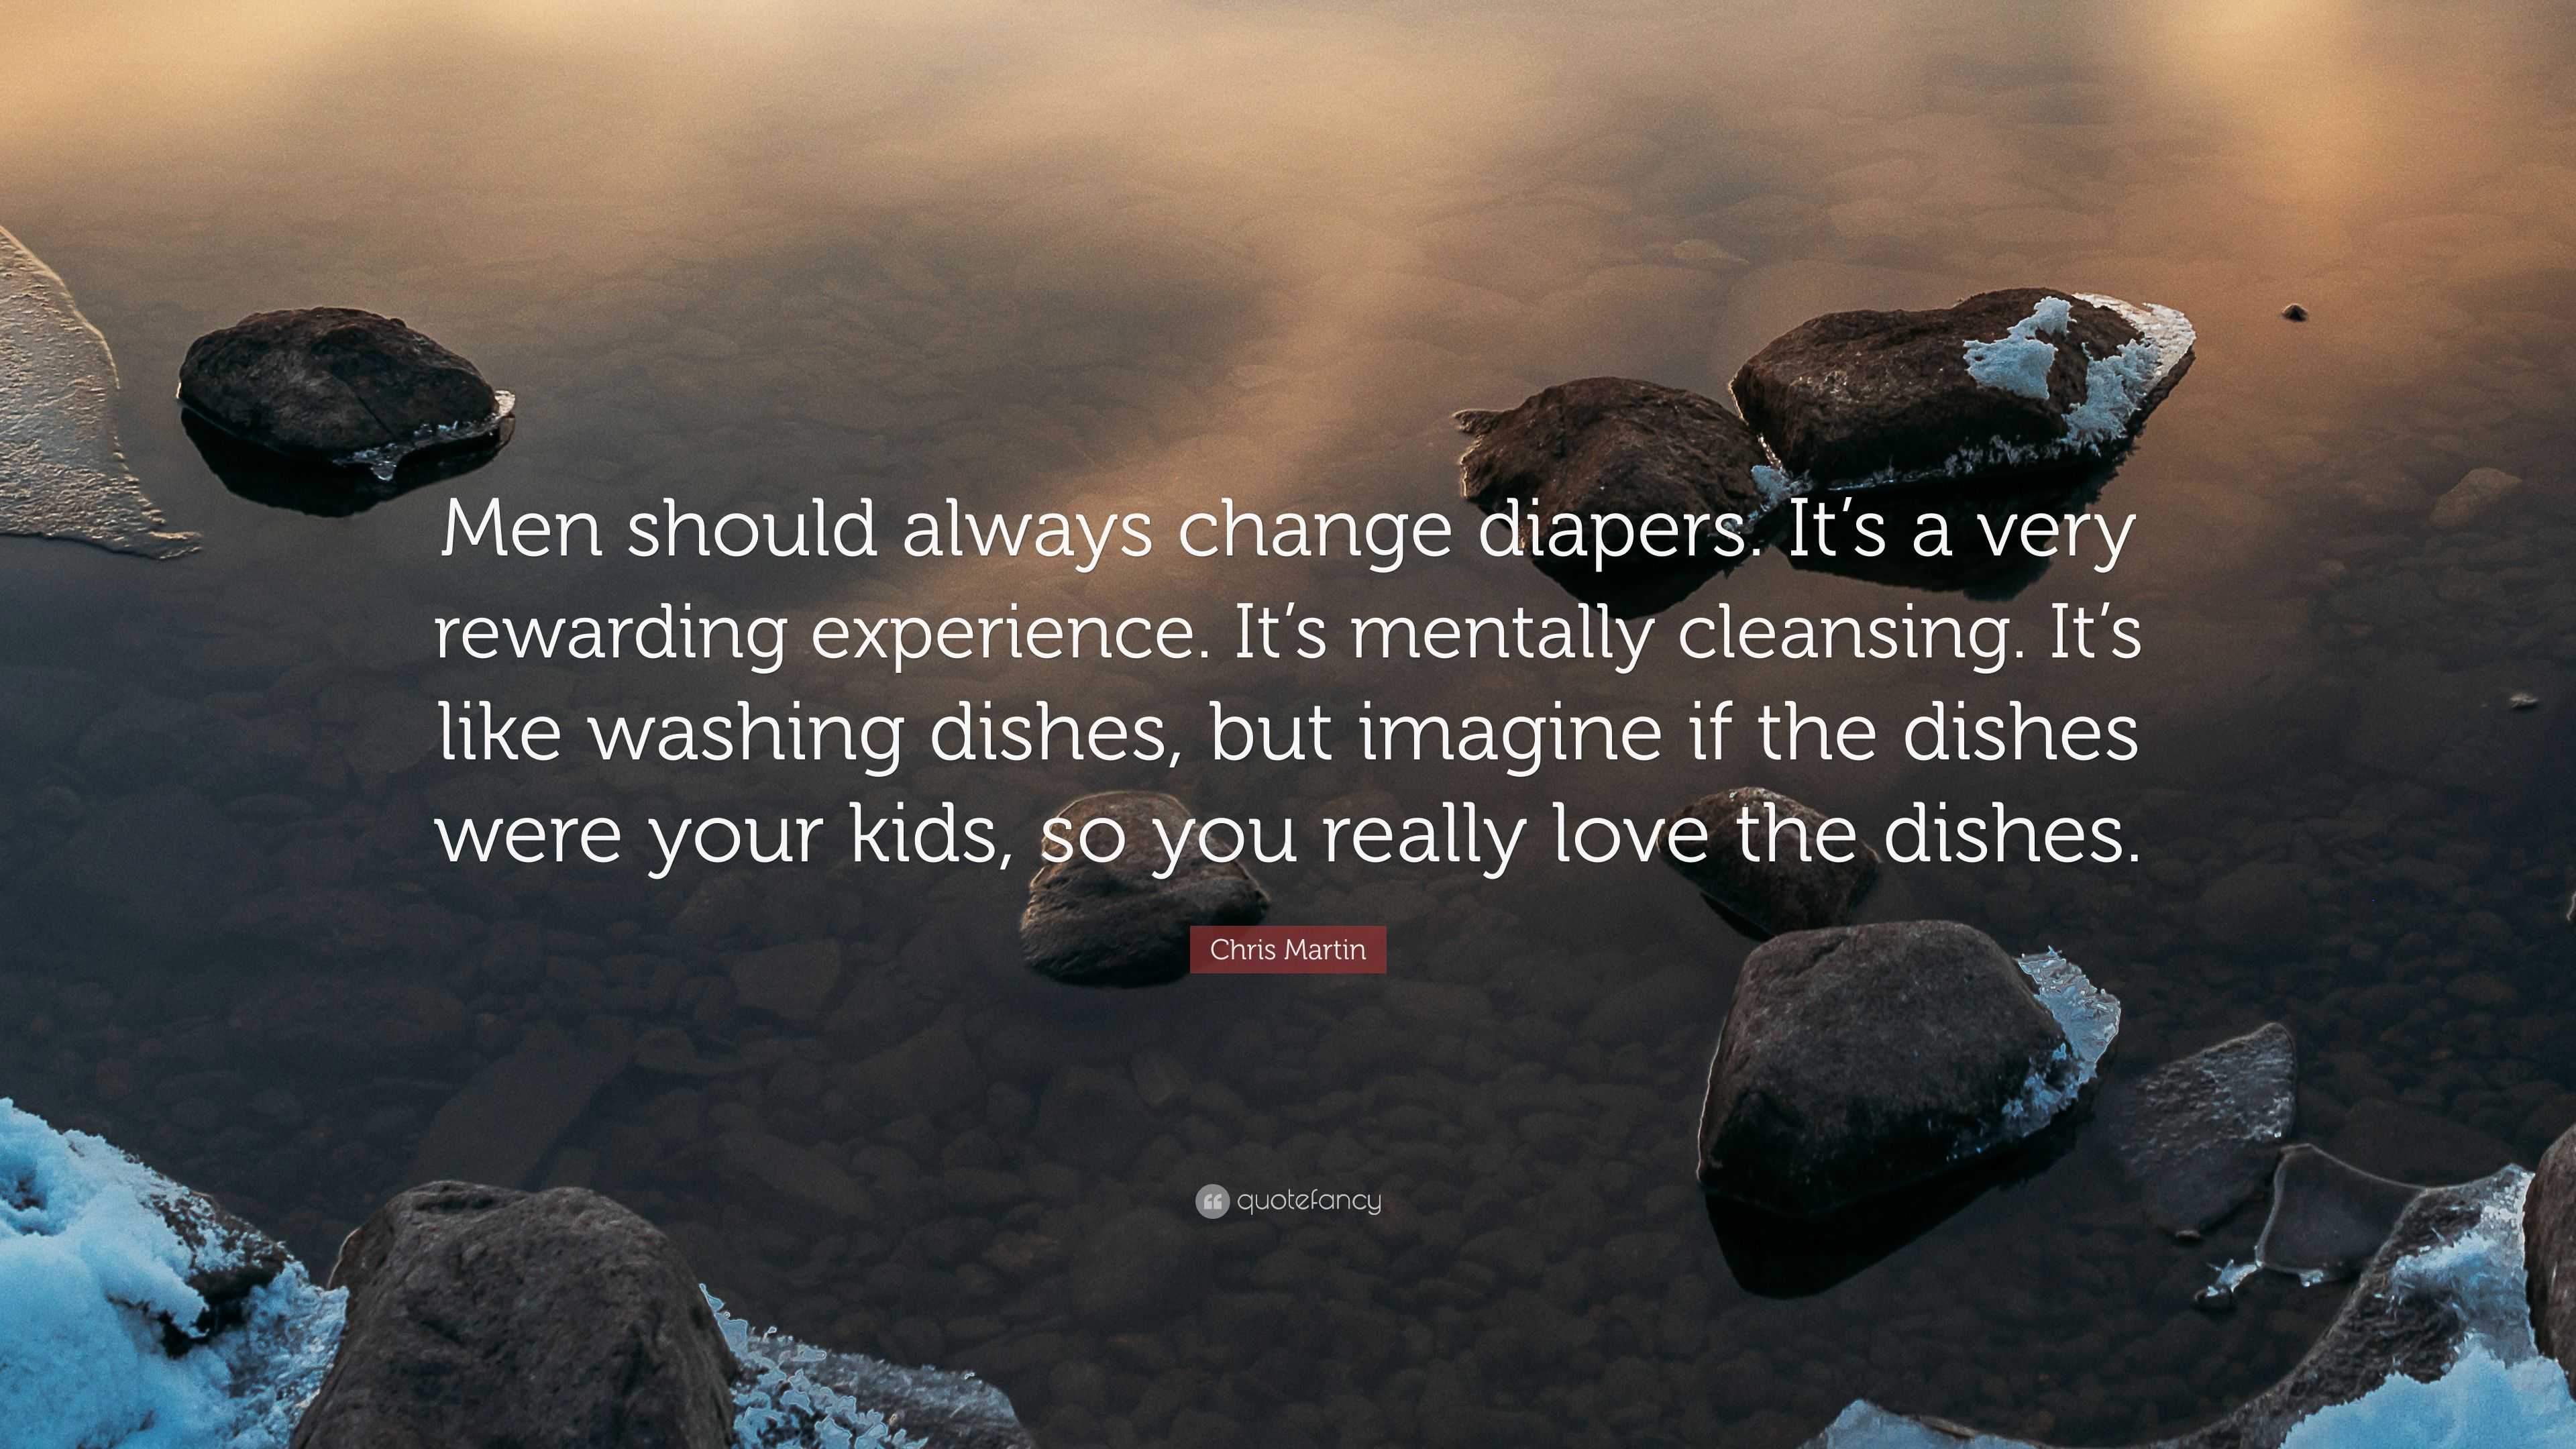 Chris Martin Quote: “Men should always change diapers. It's a very  rewarding experience. It's mentally cleansing. It's like washing dishes,  b”